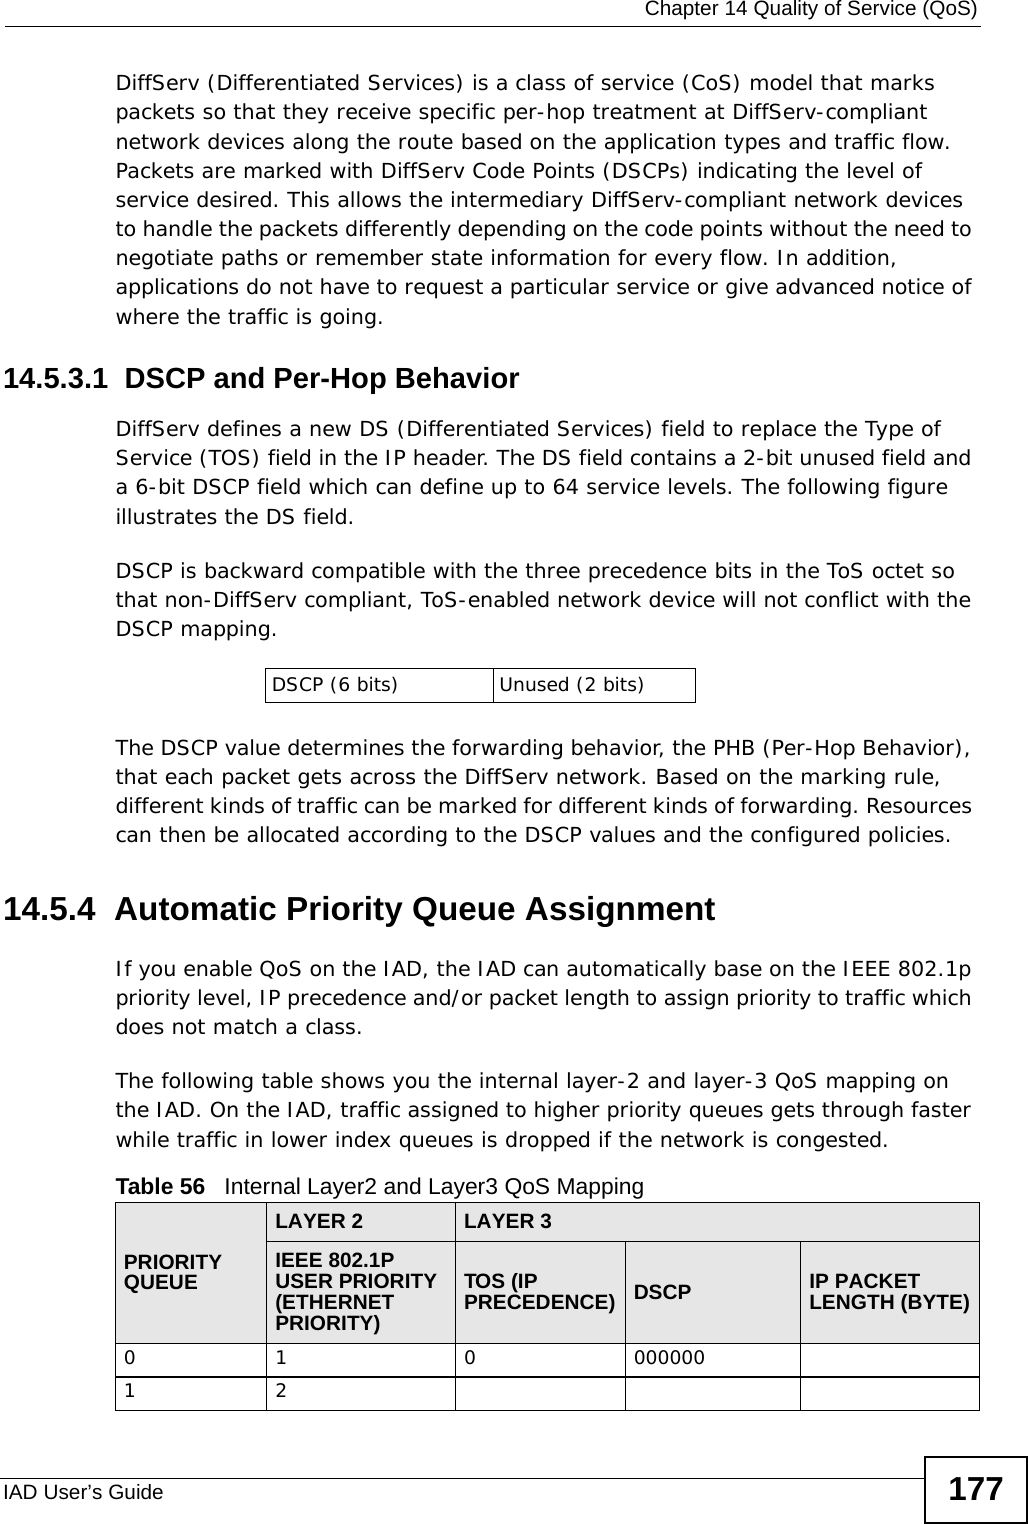  Chapter 14 Quality of Service (QoS)IAD User’s Guide 177DiffServ (Differentiated Services) is a class of service (CoS) model that marks packets so that they receive specific per-hop treatment at DiffServ-compliant network devices along the route based on the application types and traffic flow. Packets are marked with DiffServ Code Points (DSCPs) indicating the level of service desired. This allows the intermediary DiffServ-compliant network devices to handle the packets differently depending on the code points without the need to negotiate paths or remember state information for every flow. In addition, applications do not have to request a particular service or give advanced notice of where the traffic is going. 14.5.3.1  DSCP and Per-Hop Behavior DiffServ defines a new DS (Differentiated Services) field to replace the Type of Service (TOS) field in the IP header. The DS field contains a 2-bit unused field and a 6-bit DSCP field which can define up to 64 service levels. The following figure illustrates the DS field. DSCP is backward compatible with the three precedence bits in the ToS octet so that non-DiffServ compliant, ToS-enabled network device will not conflict with the DSCP mapping.The DSCP value determines the forwarding behavior, the PHB (Per-Hop Behavior), that each packet gets across the DiffServ network. Based on the marking rule, different kinds of traffic can be marked for different kinds of forwarding. Resources can then be allocated according to the DSCP values and the configured policies.14.5.4  Automatic Priority Queue AssignmentIf you enable QoS on the IAD, the IAD can automatically base on the IEEE 802.1p priority level, IP precedence and/or packet length to assign priority to traffic which does not match a class. The following table shows you the internal layer-2 and layer-3 QoS mapping on the IAD. On the IAD, traffic assigned to higher priority queues gets through faster while traffic in lower index queues is dropped if the network is congested.DSCP (6 bits) Unused (2 bits)Table 56   Internal Layer2 and Layer3 QoS MappingPRIORITY QUEUELAYER 2 LAYER 3IEEE 802.1P USER PRIORITY (ETHERNET PRIORITY)TOS (IP PRECEDENCE) DSCP IP PACKET LENGTH (BYTE)0 1 0 00000012